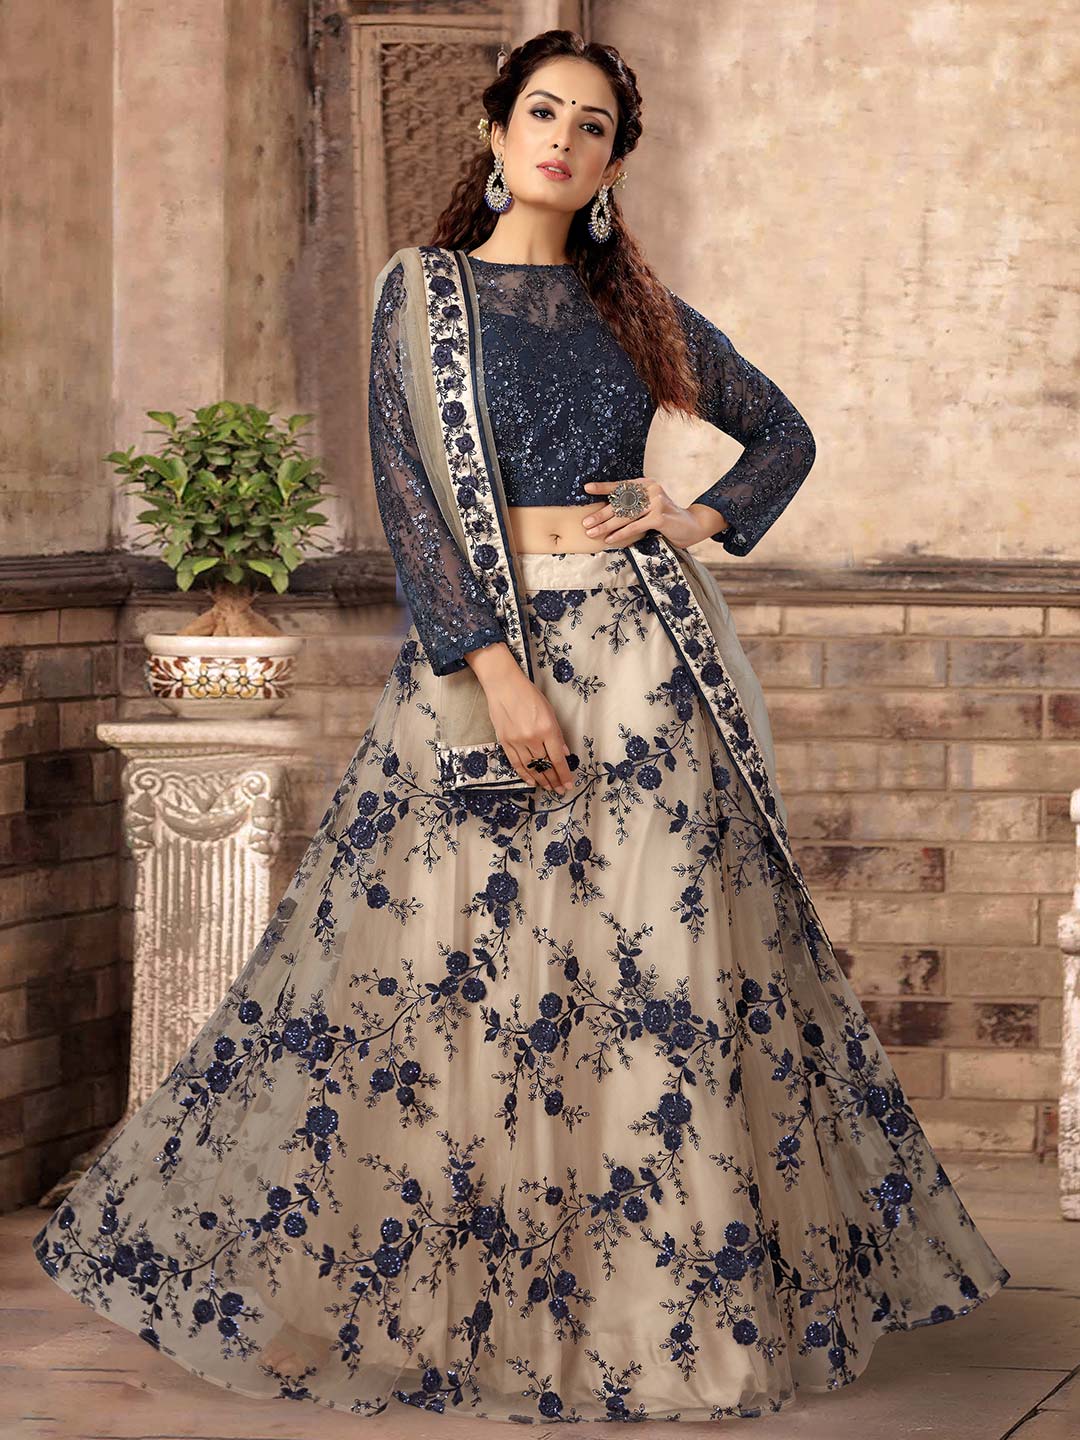 10 Gorgeous Indian Dresses for Short Height Girls To Look Tall